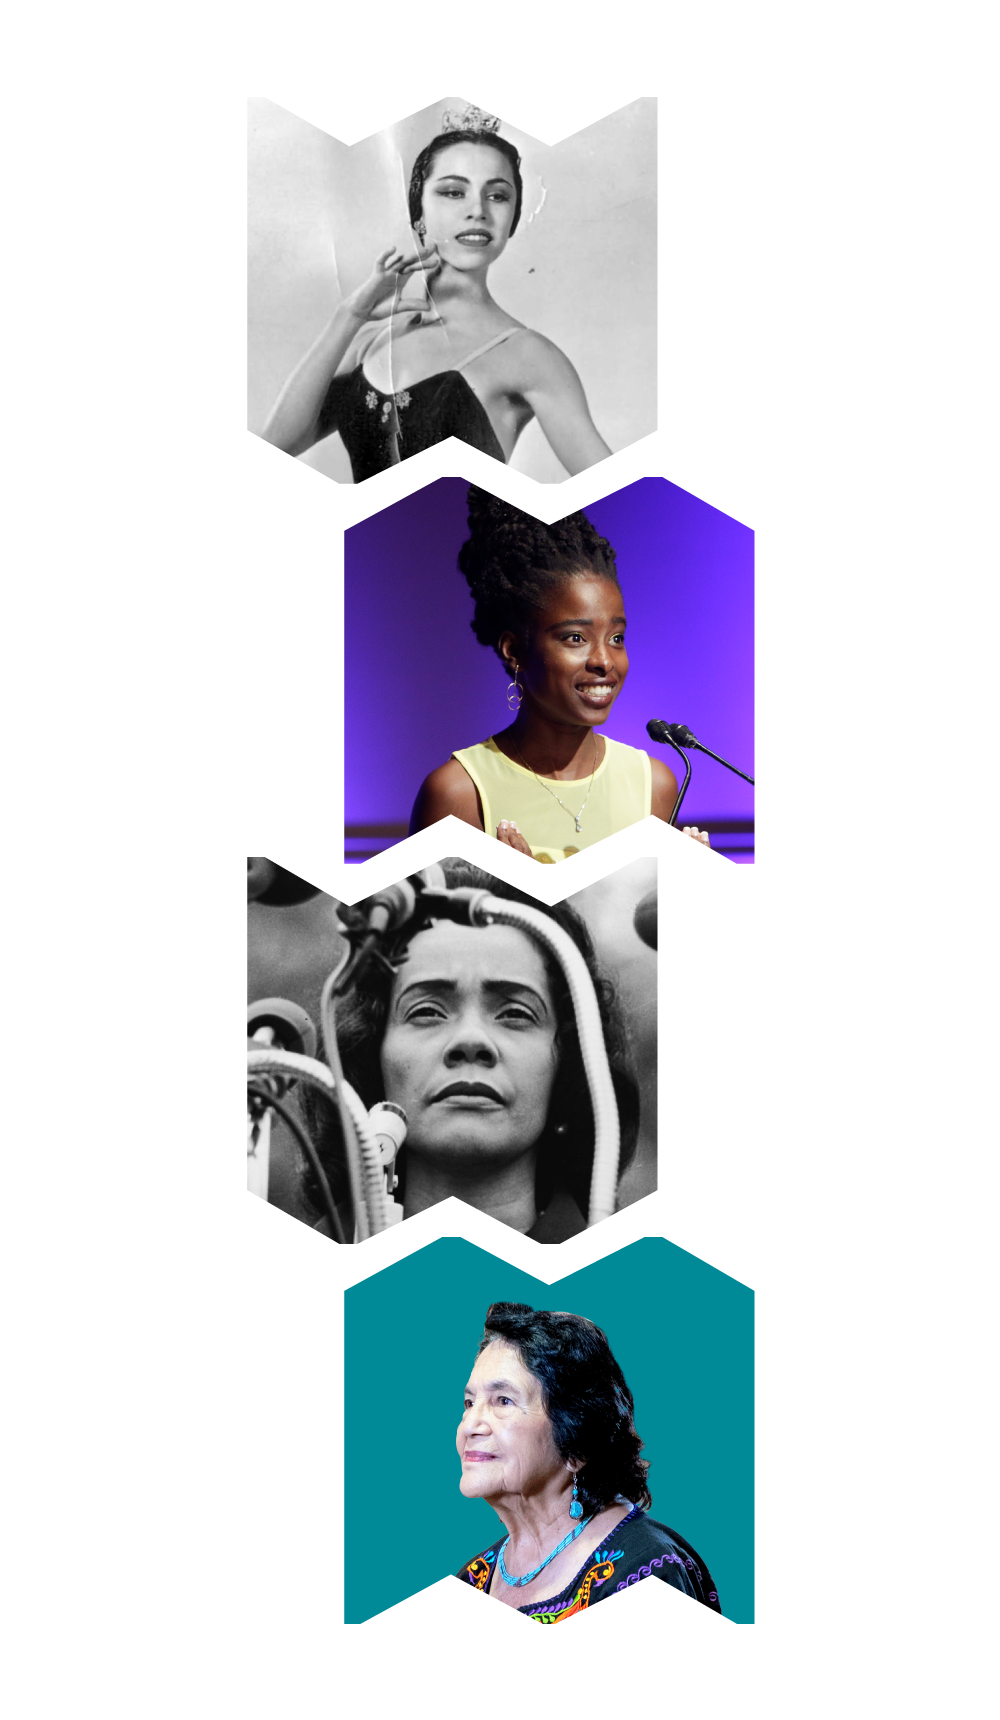 Top "W" frame with Maria Tallchief; middle "M" frame with Amanda Gorman; middile "W" frame with Coretta Scott King; bottom "M" frame with Dolores Huerta.